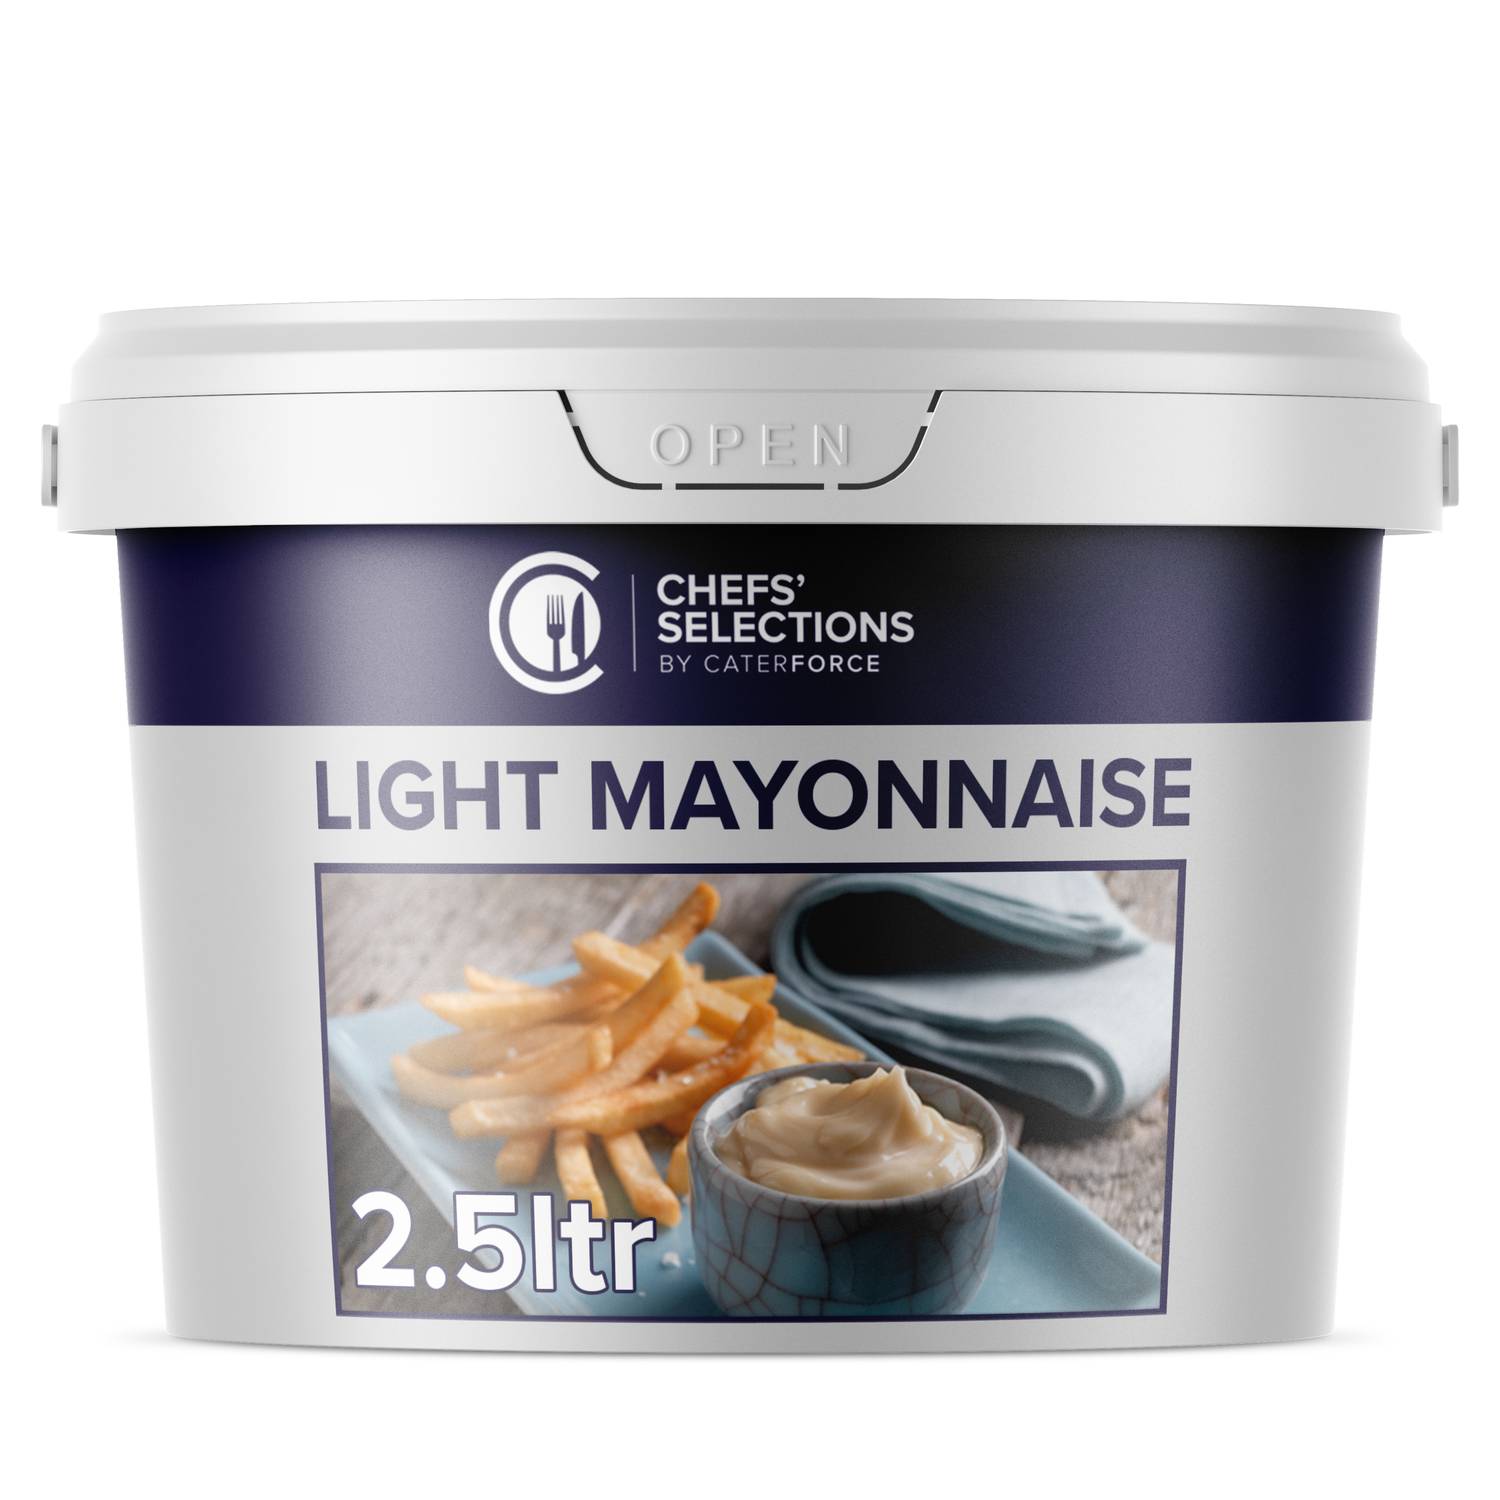 Chefs’ Selections Light Mayonnaise (1 x 2.5L)